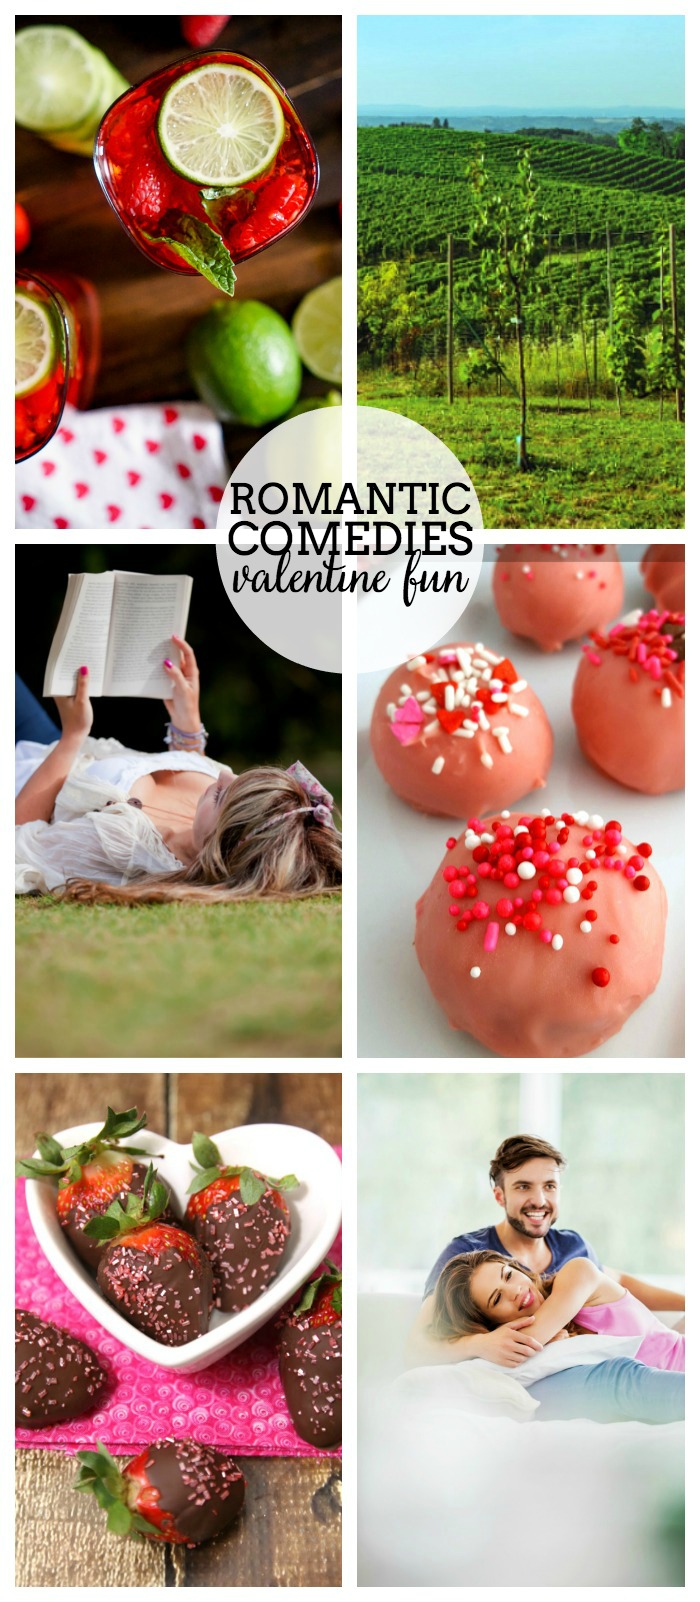 Celebrate your love of Romantic Comedies - These posts are inspired by your favorite romantic comedies and are perfect Valentine's Day ideas! 